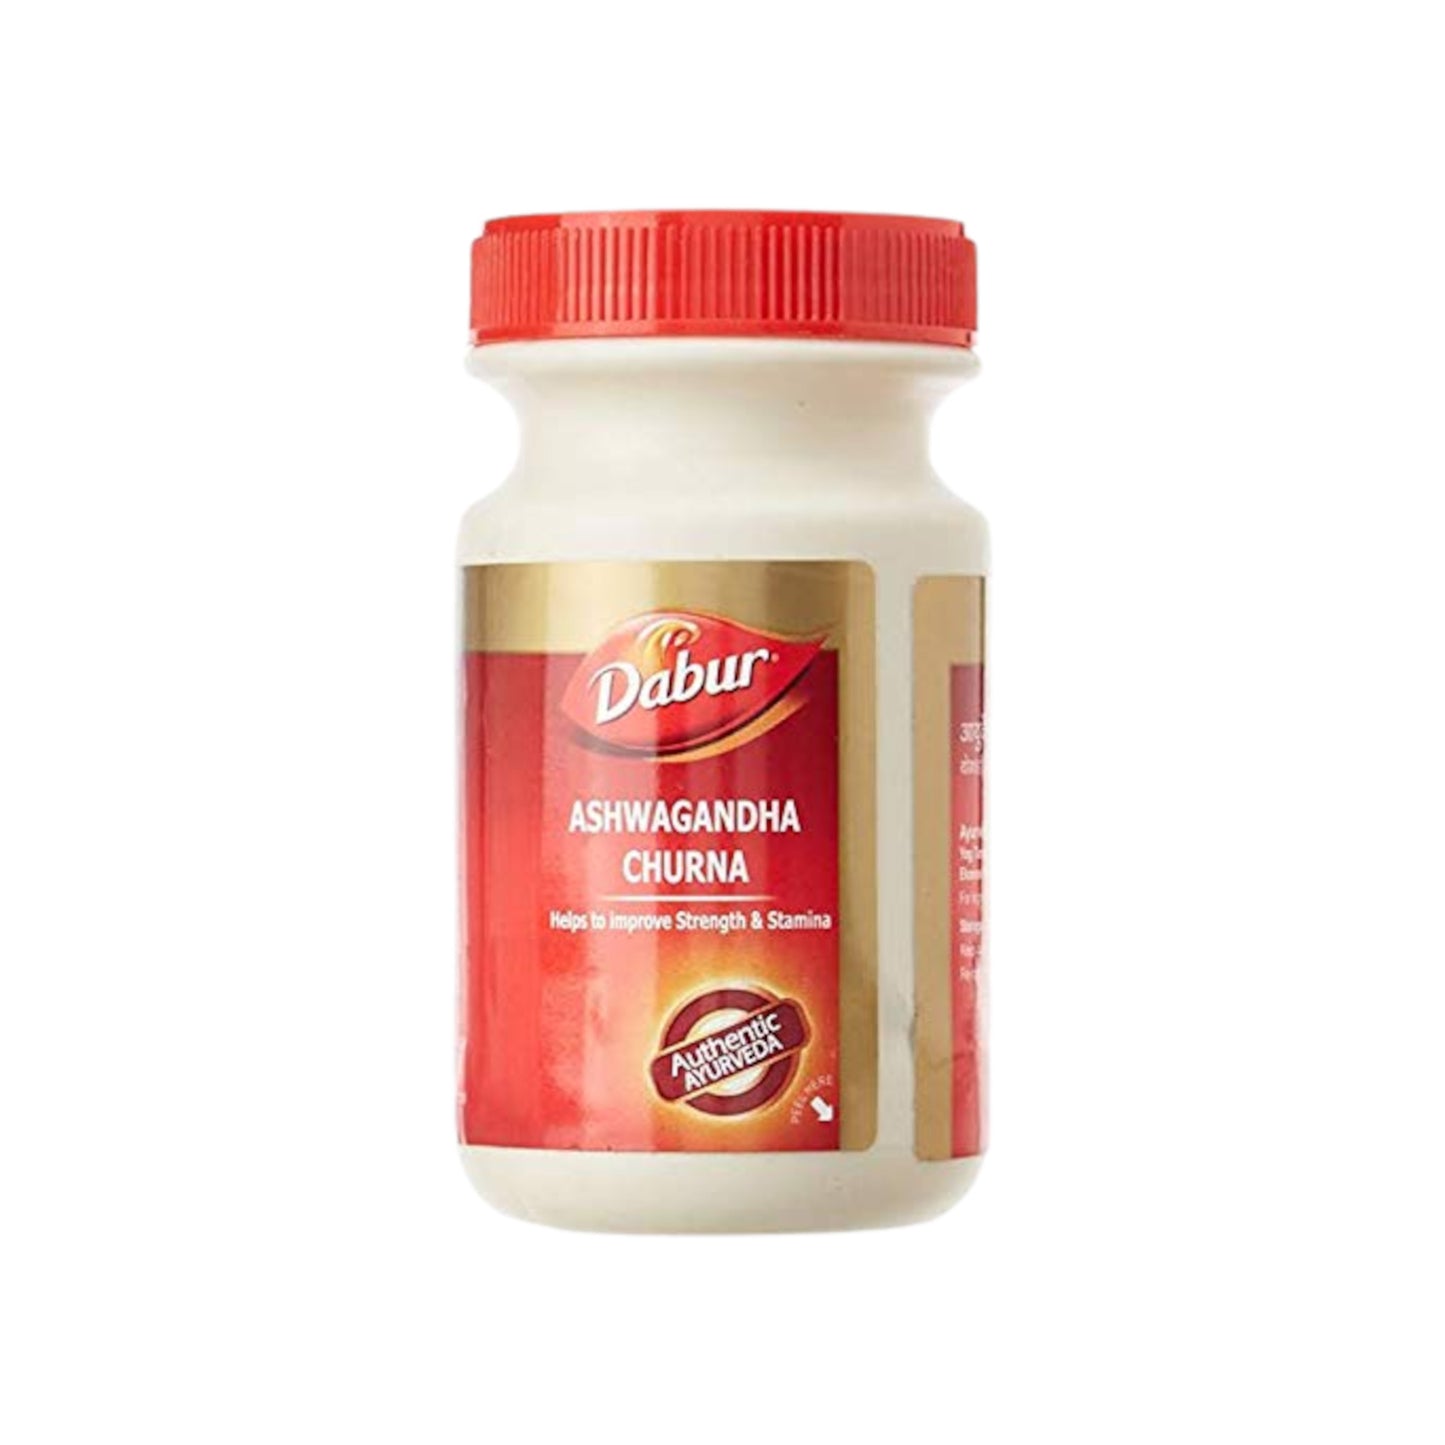 Image of Dabur Ashwagandha Churna: Traditional Ayurvedic Adaptogen for Stress Support and General Well-being.